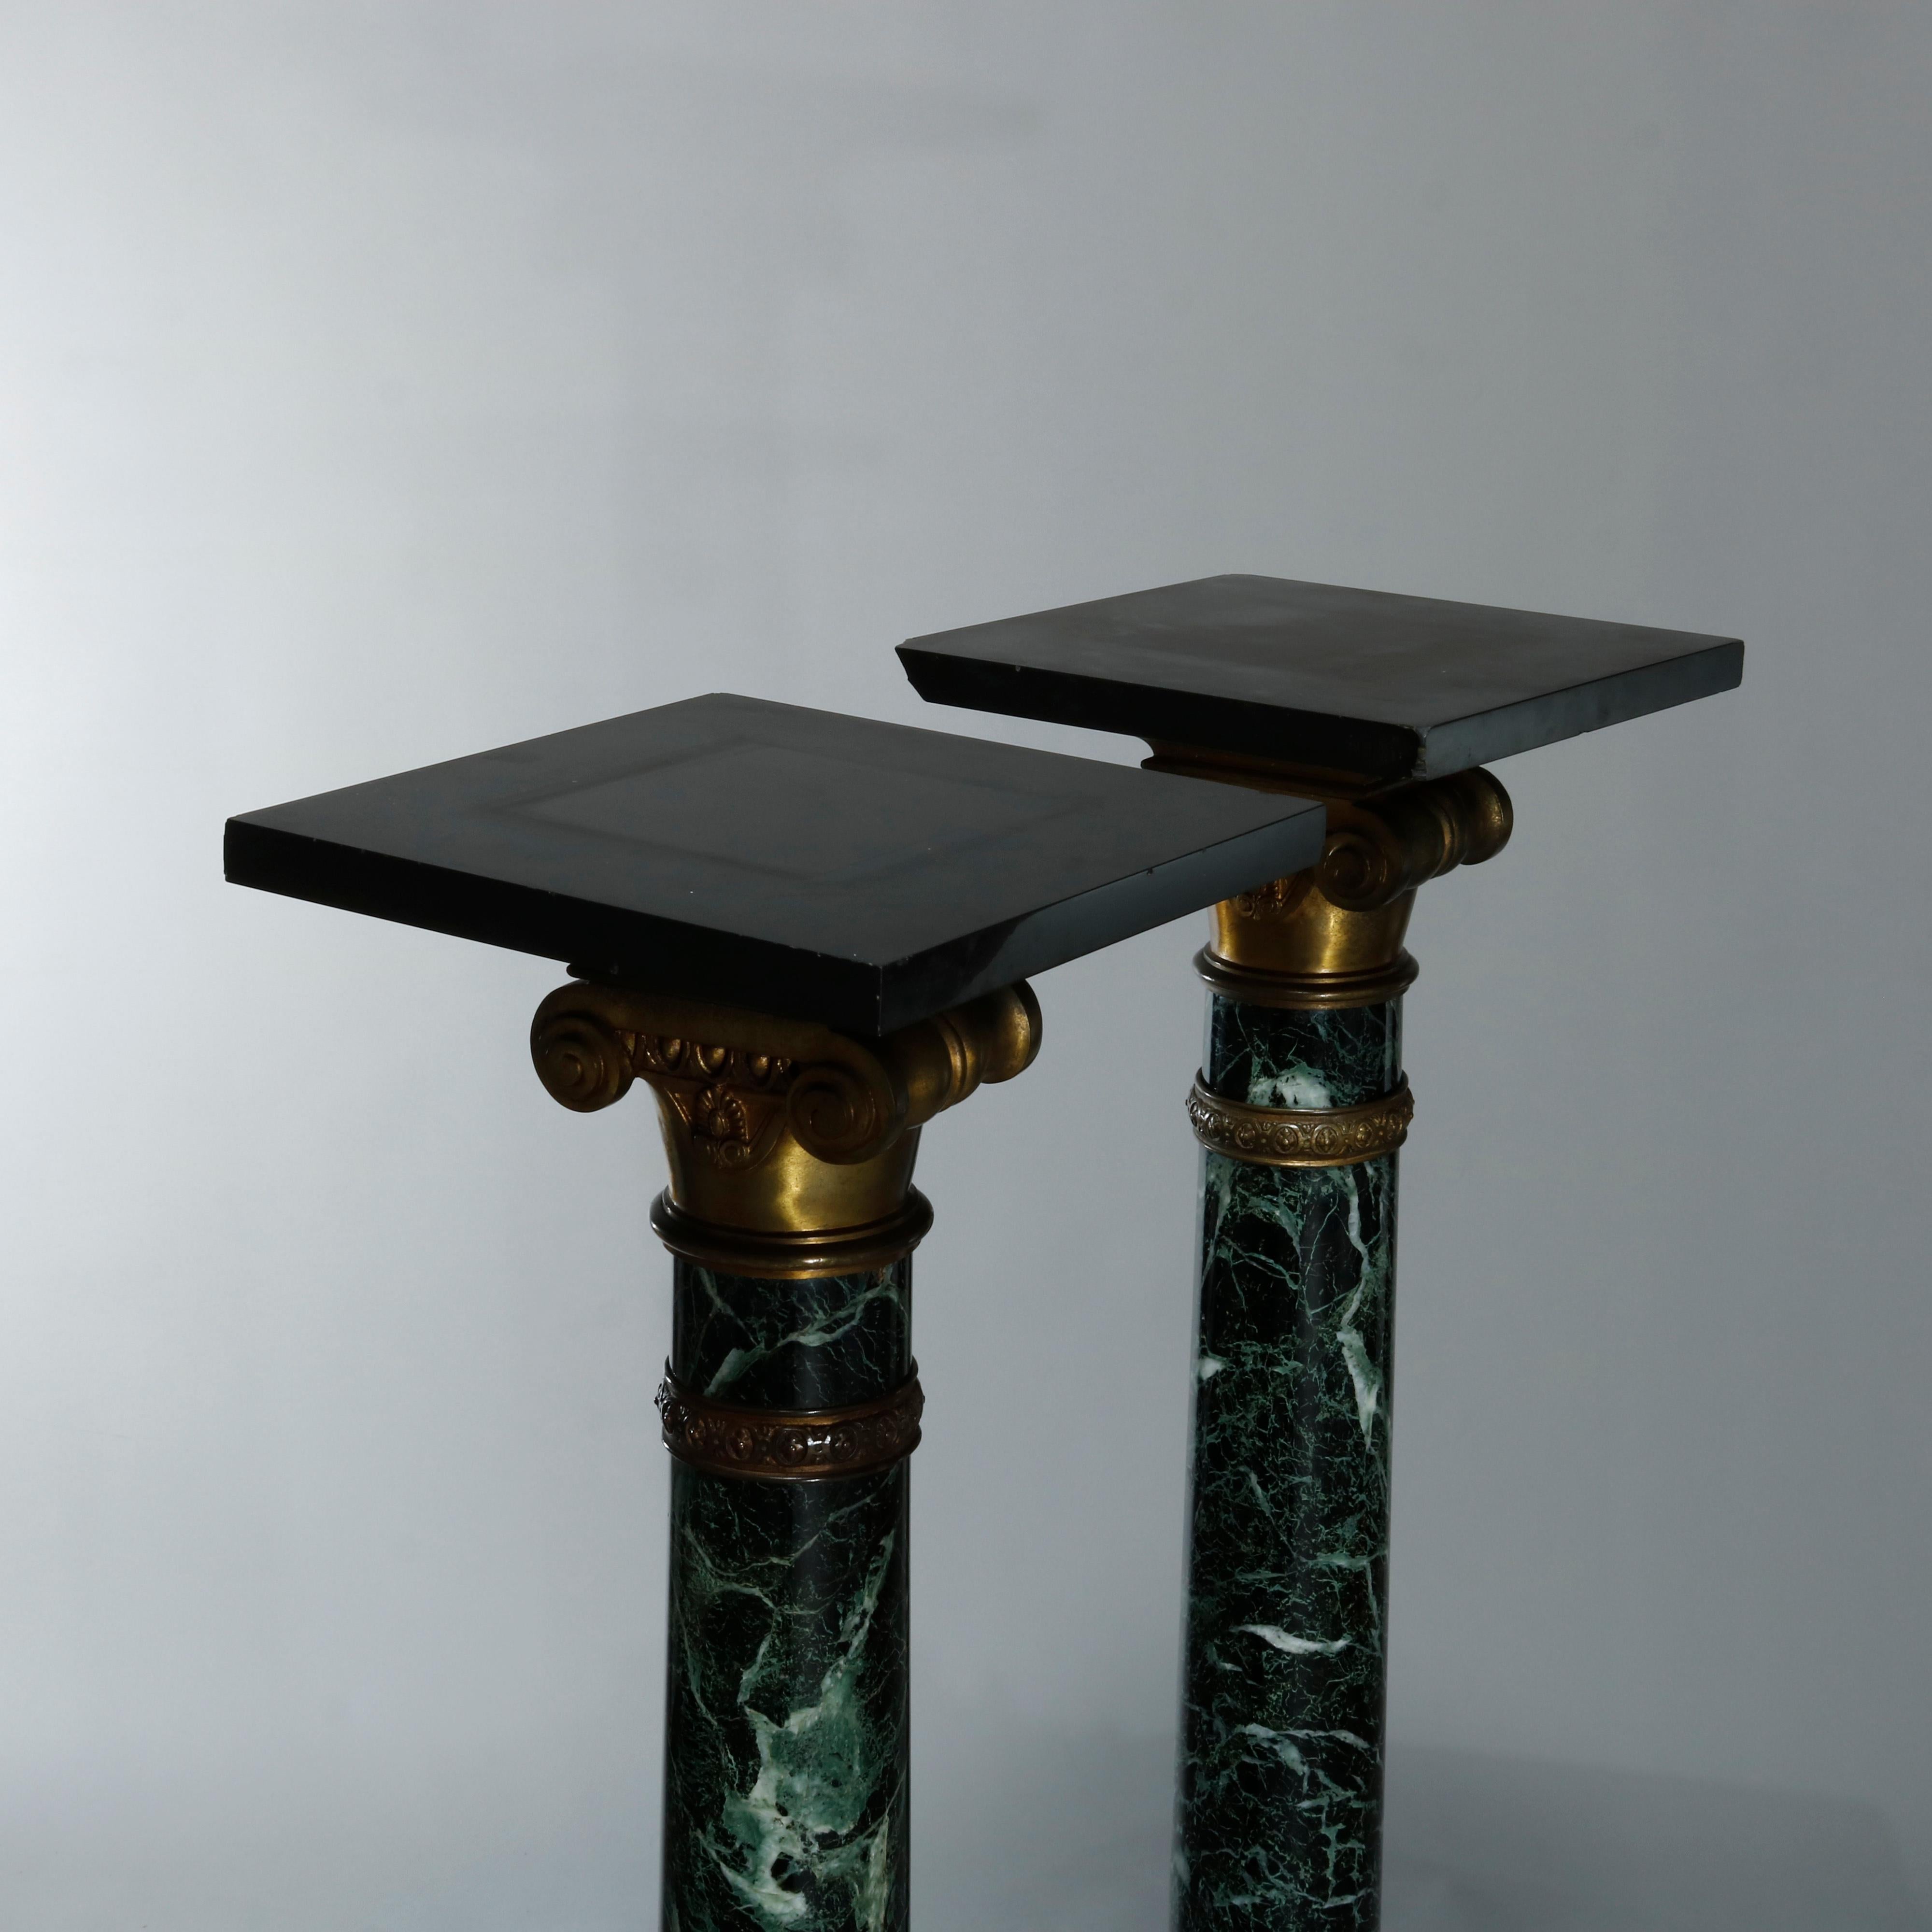 An antique pair of Neoclassical carved marble sculpture display pedestals offers Corinthian style columns with foliate cast bronze scrolled capitals and seated on square base raised on scroll form cast bronze feet, cast bronze mounts throughout,